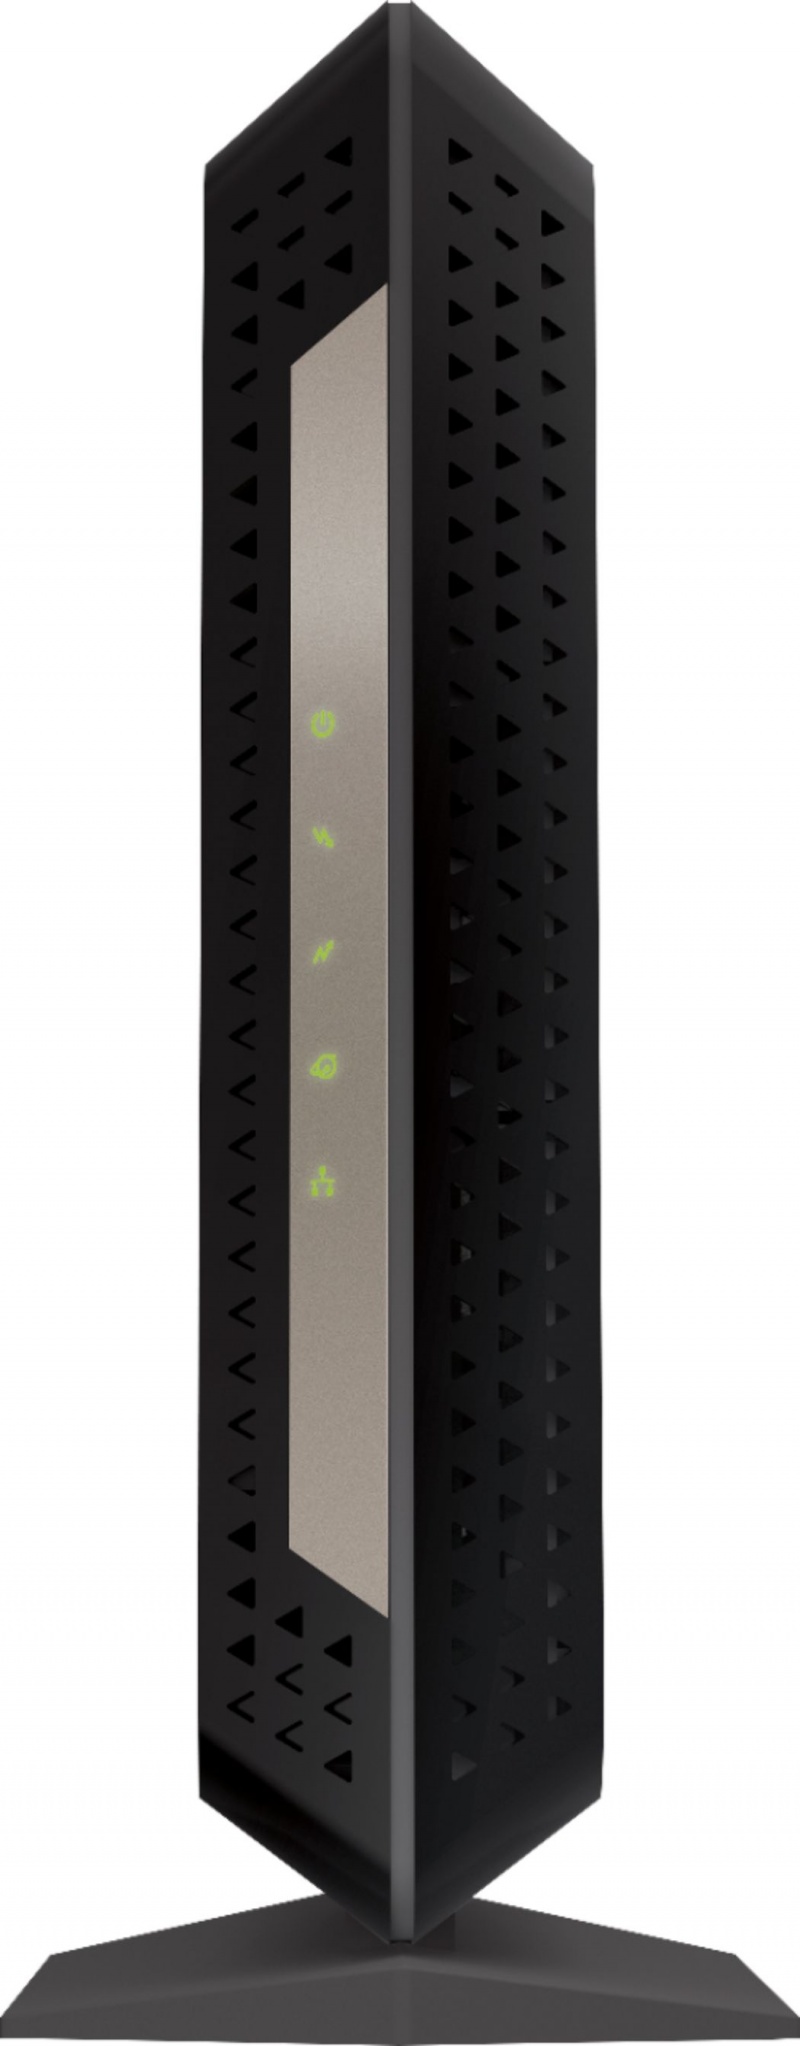 Ultra High Speed Cable Modem